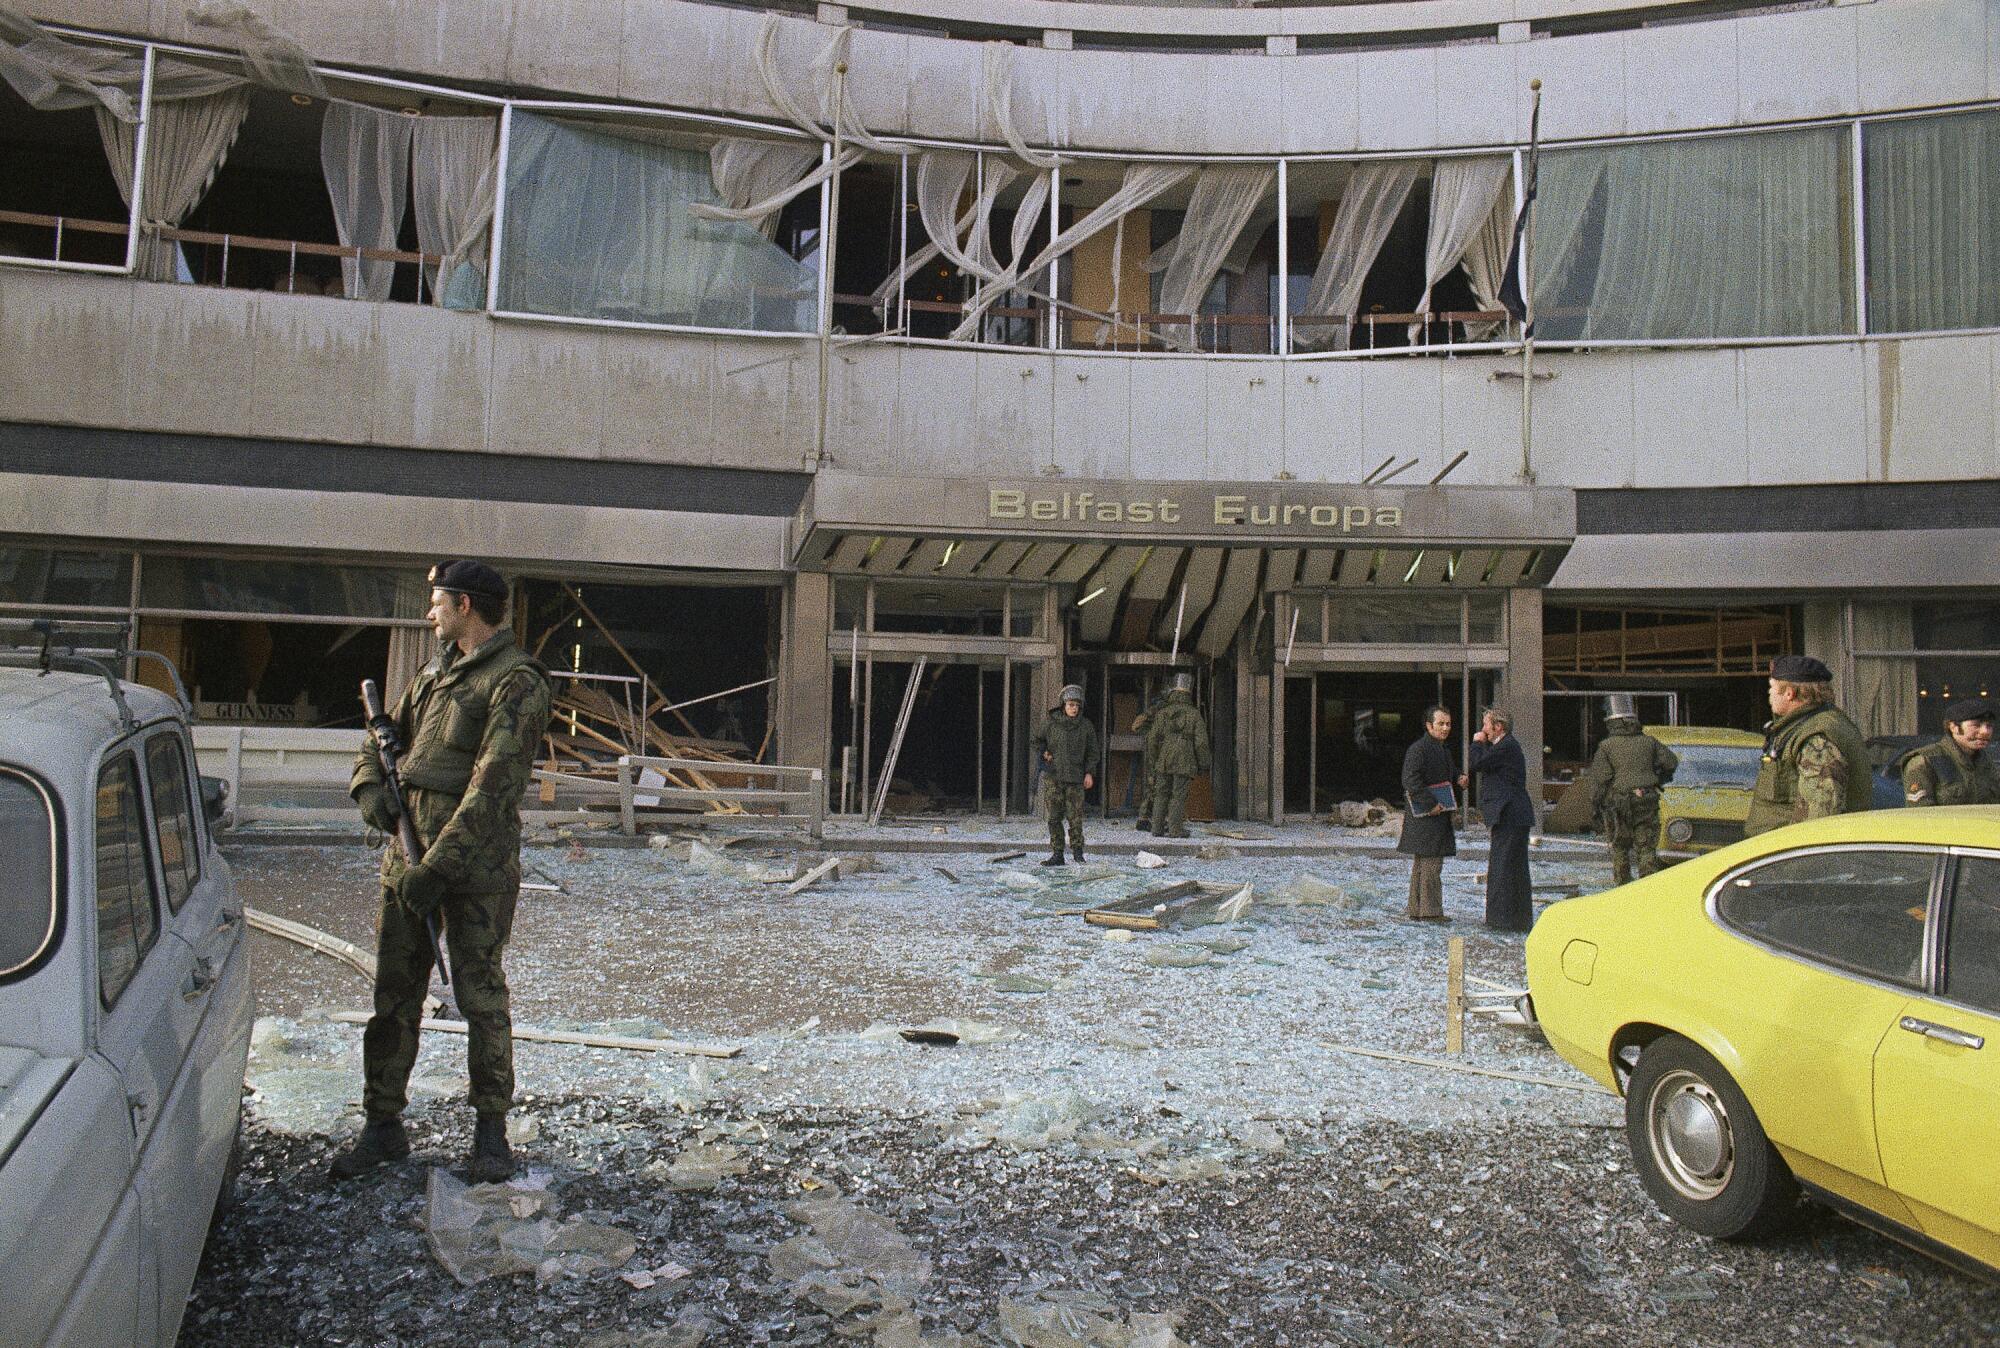 British troops stand guard as bomb experts search through the wreckage at a hotel.